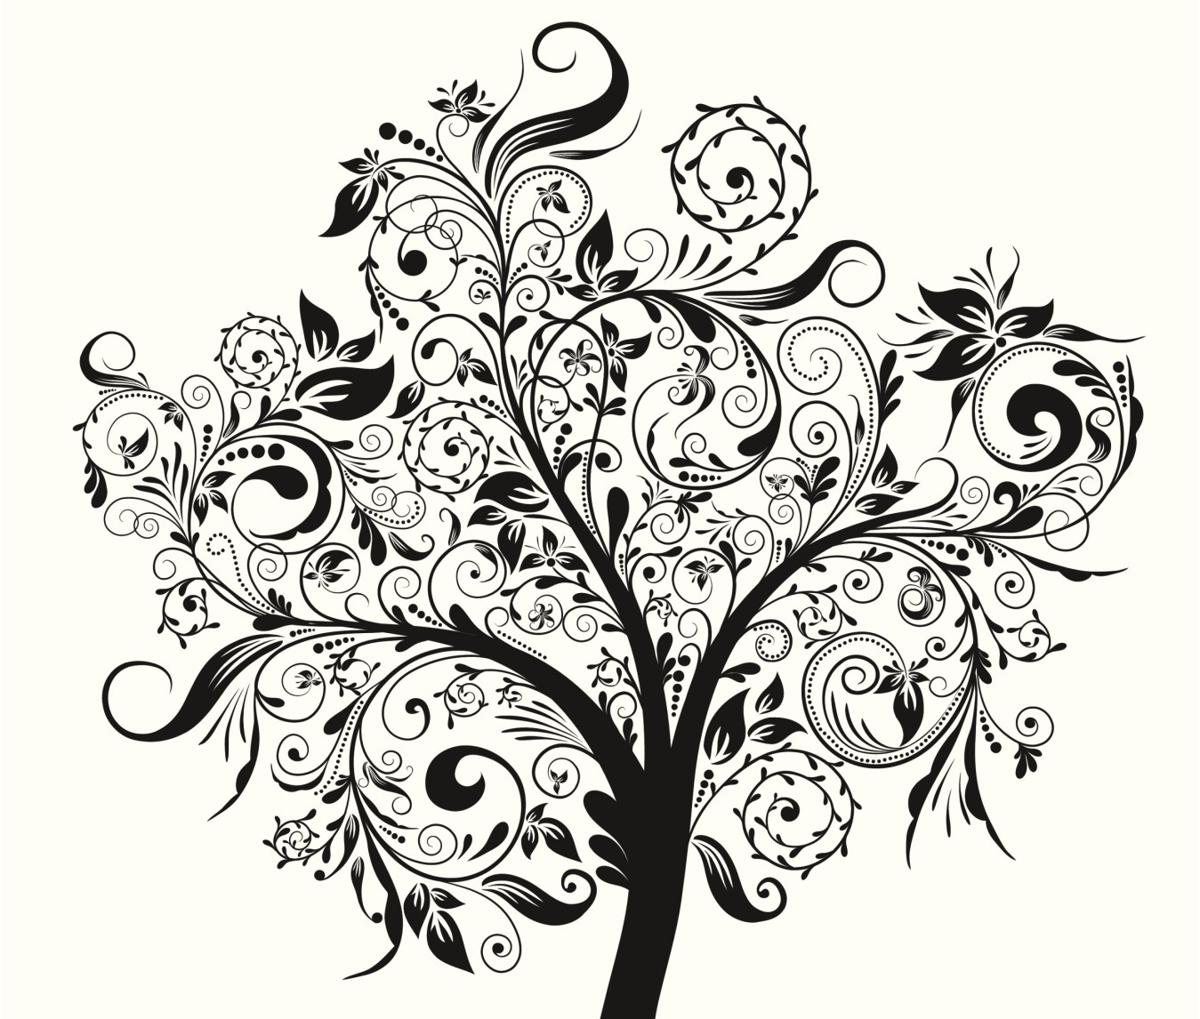 Amazing Family Tree Tattoos To Keep Your Loved Ones Close Thoughtful Tattoos